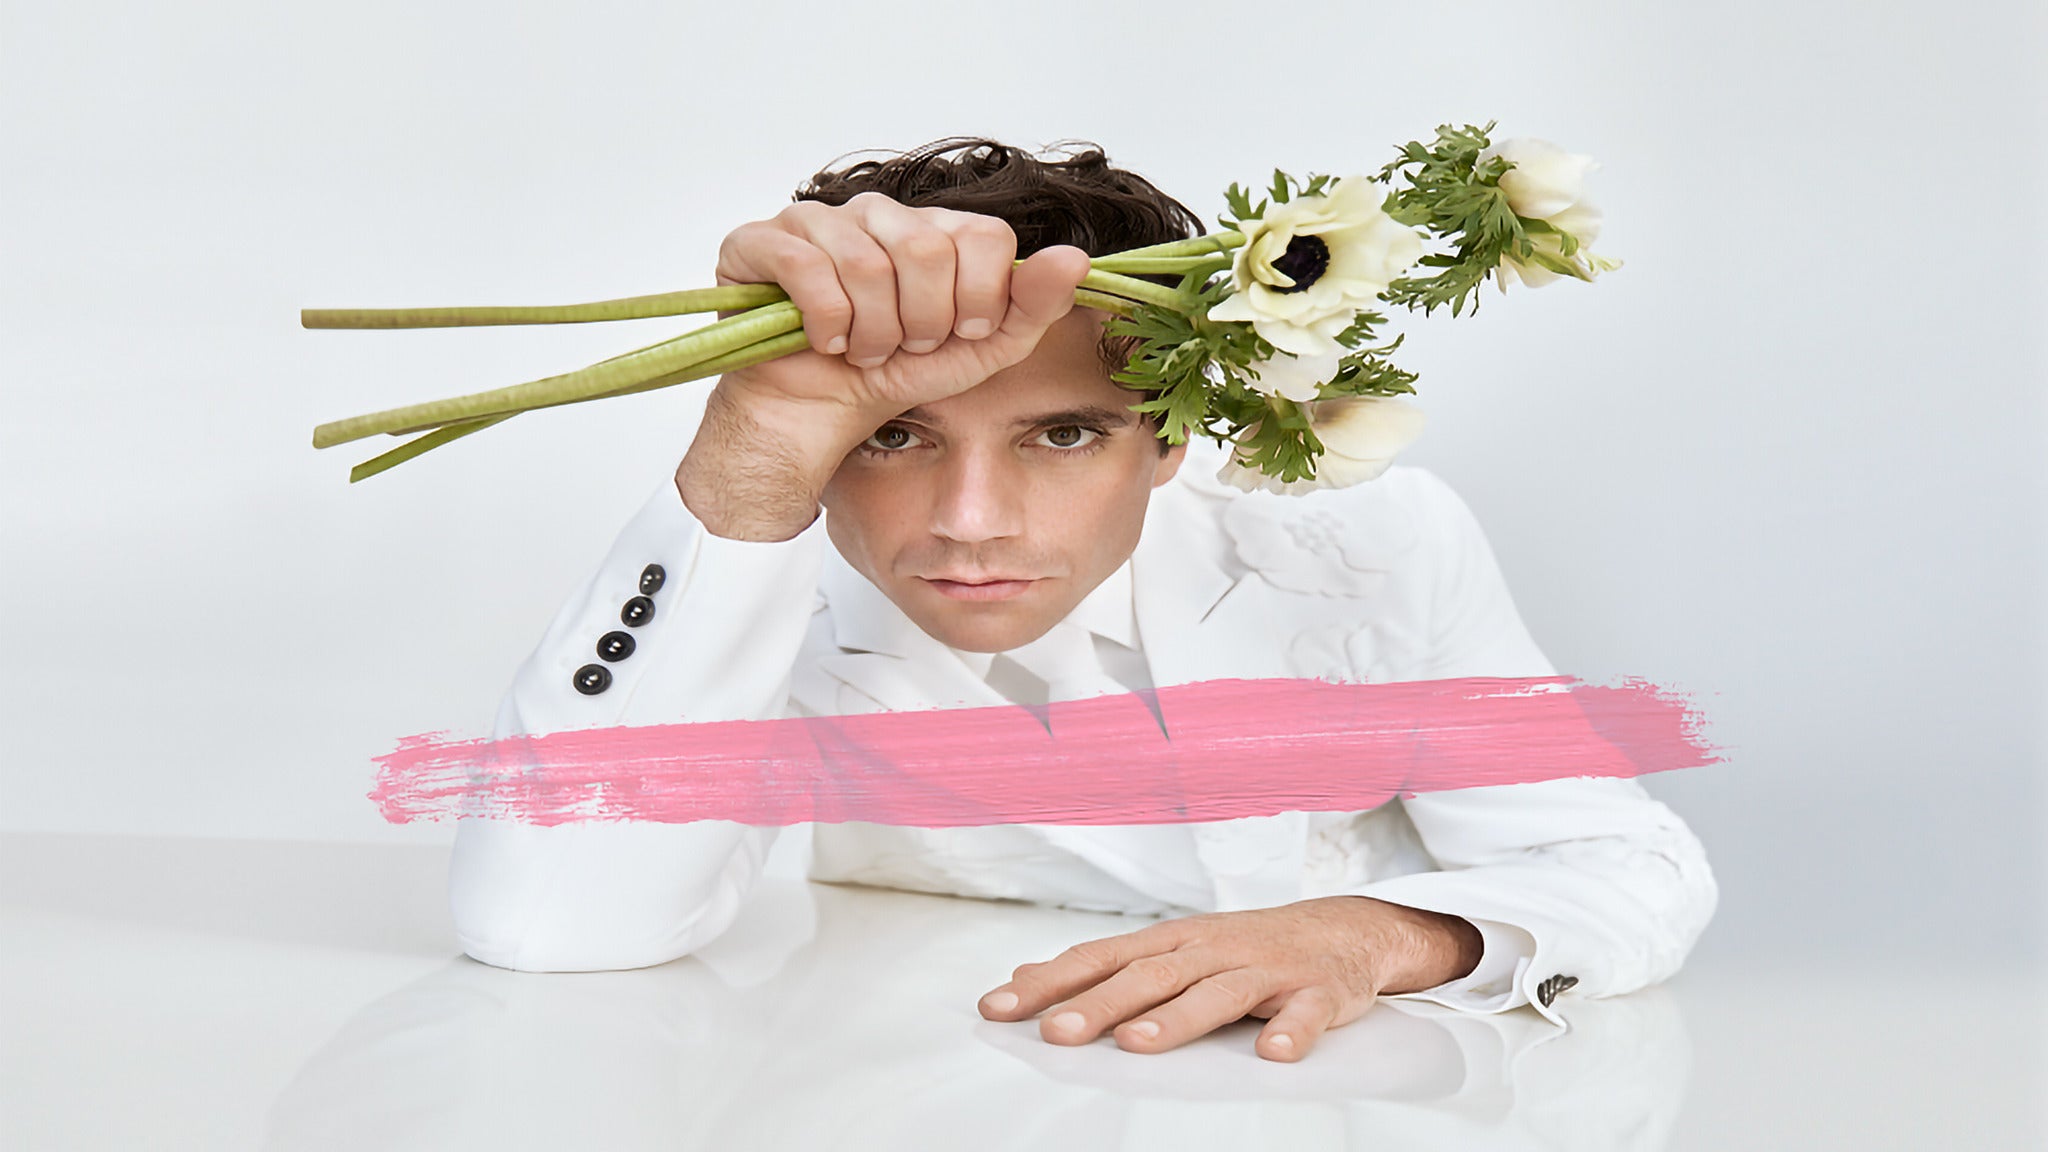 MIKA presented by Indeed For The Rite of Spring in Montreal promo photo for Prévente evenko presale offer code